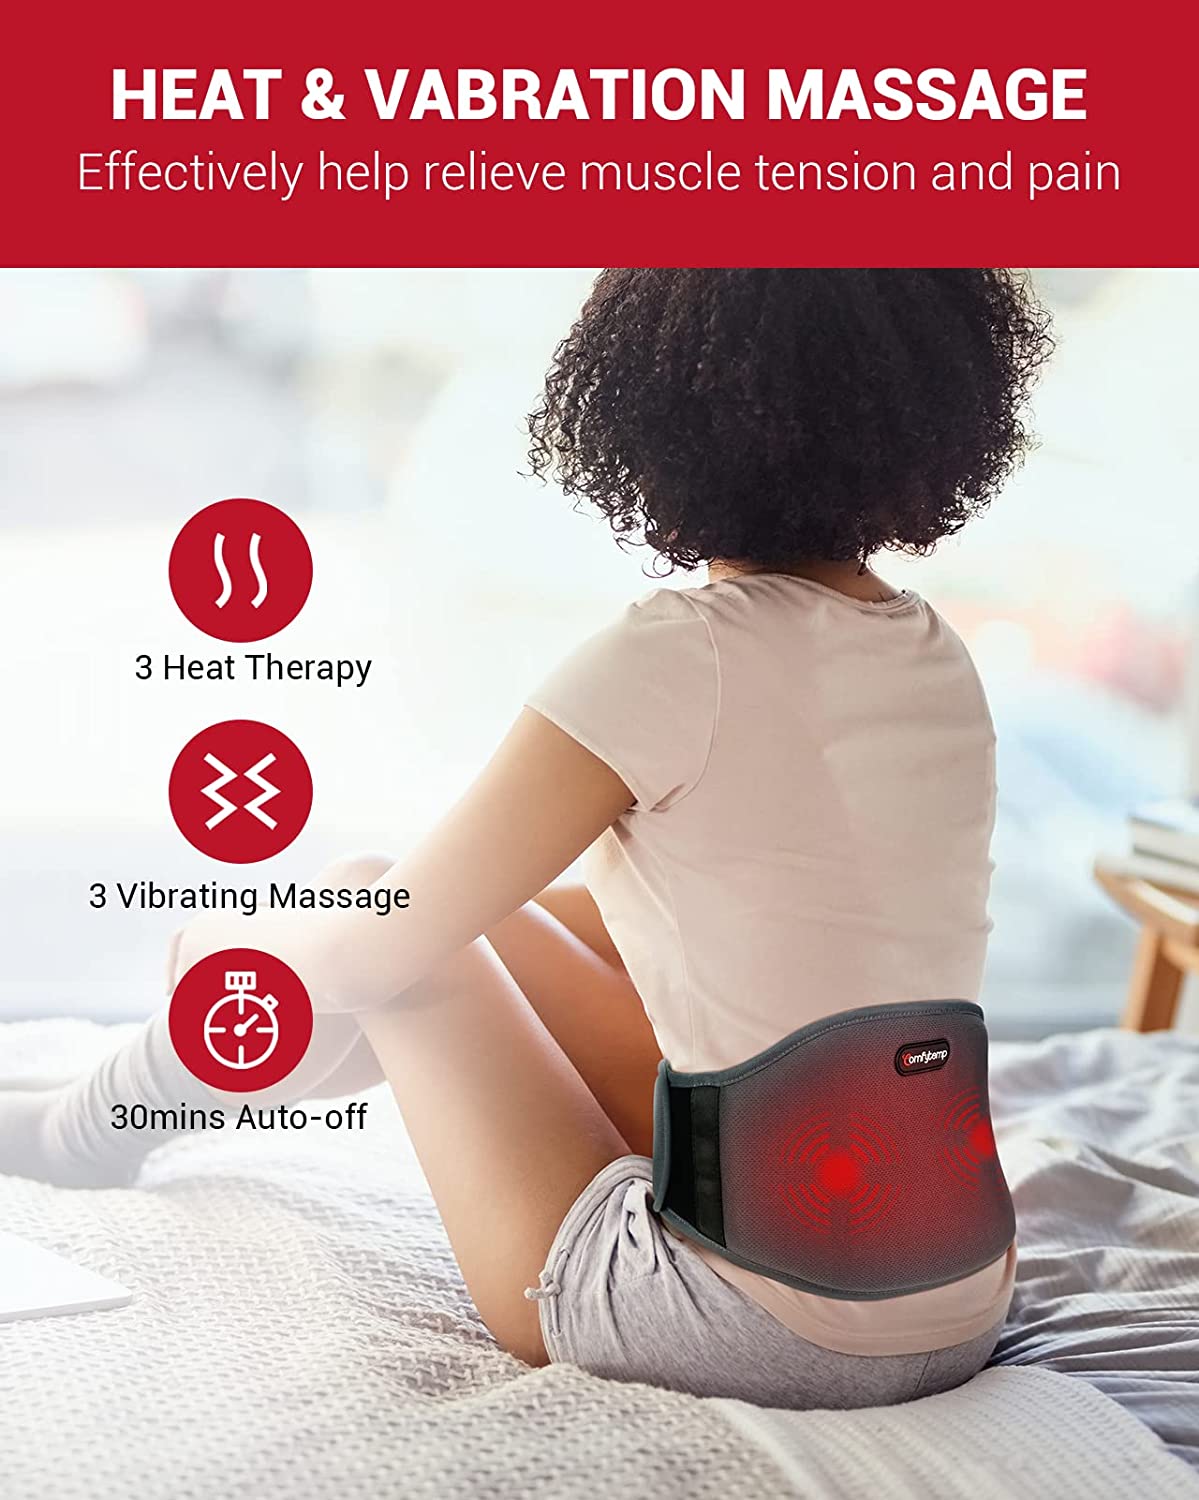 Cordless Heating Pad for Back Pain Relief - Wireless Heating Pad Back Brace  with Heat and Massage,Heat Belt for Back Pain Relief Belly Lumbar Spine  Stomach Arthritis(45inches) Heating Pad Back Massage(45in)